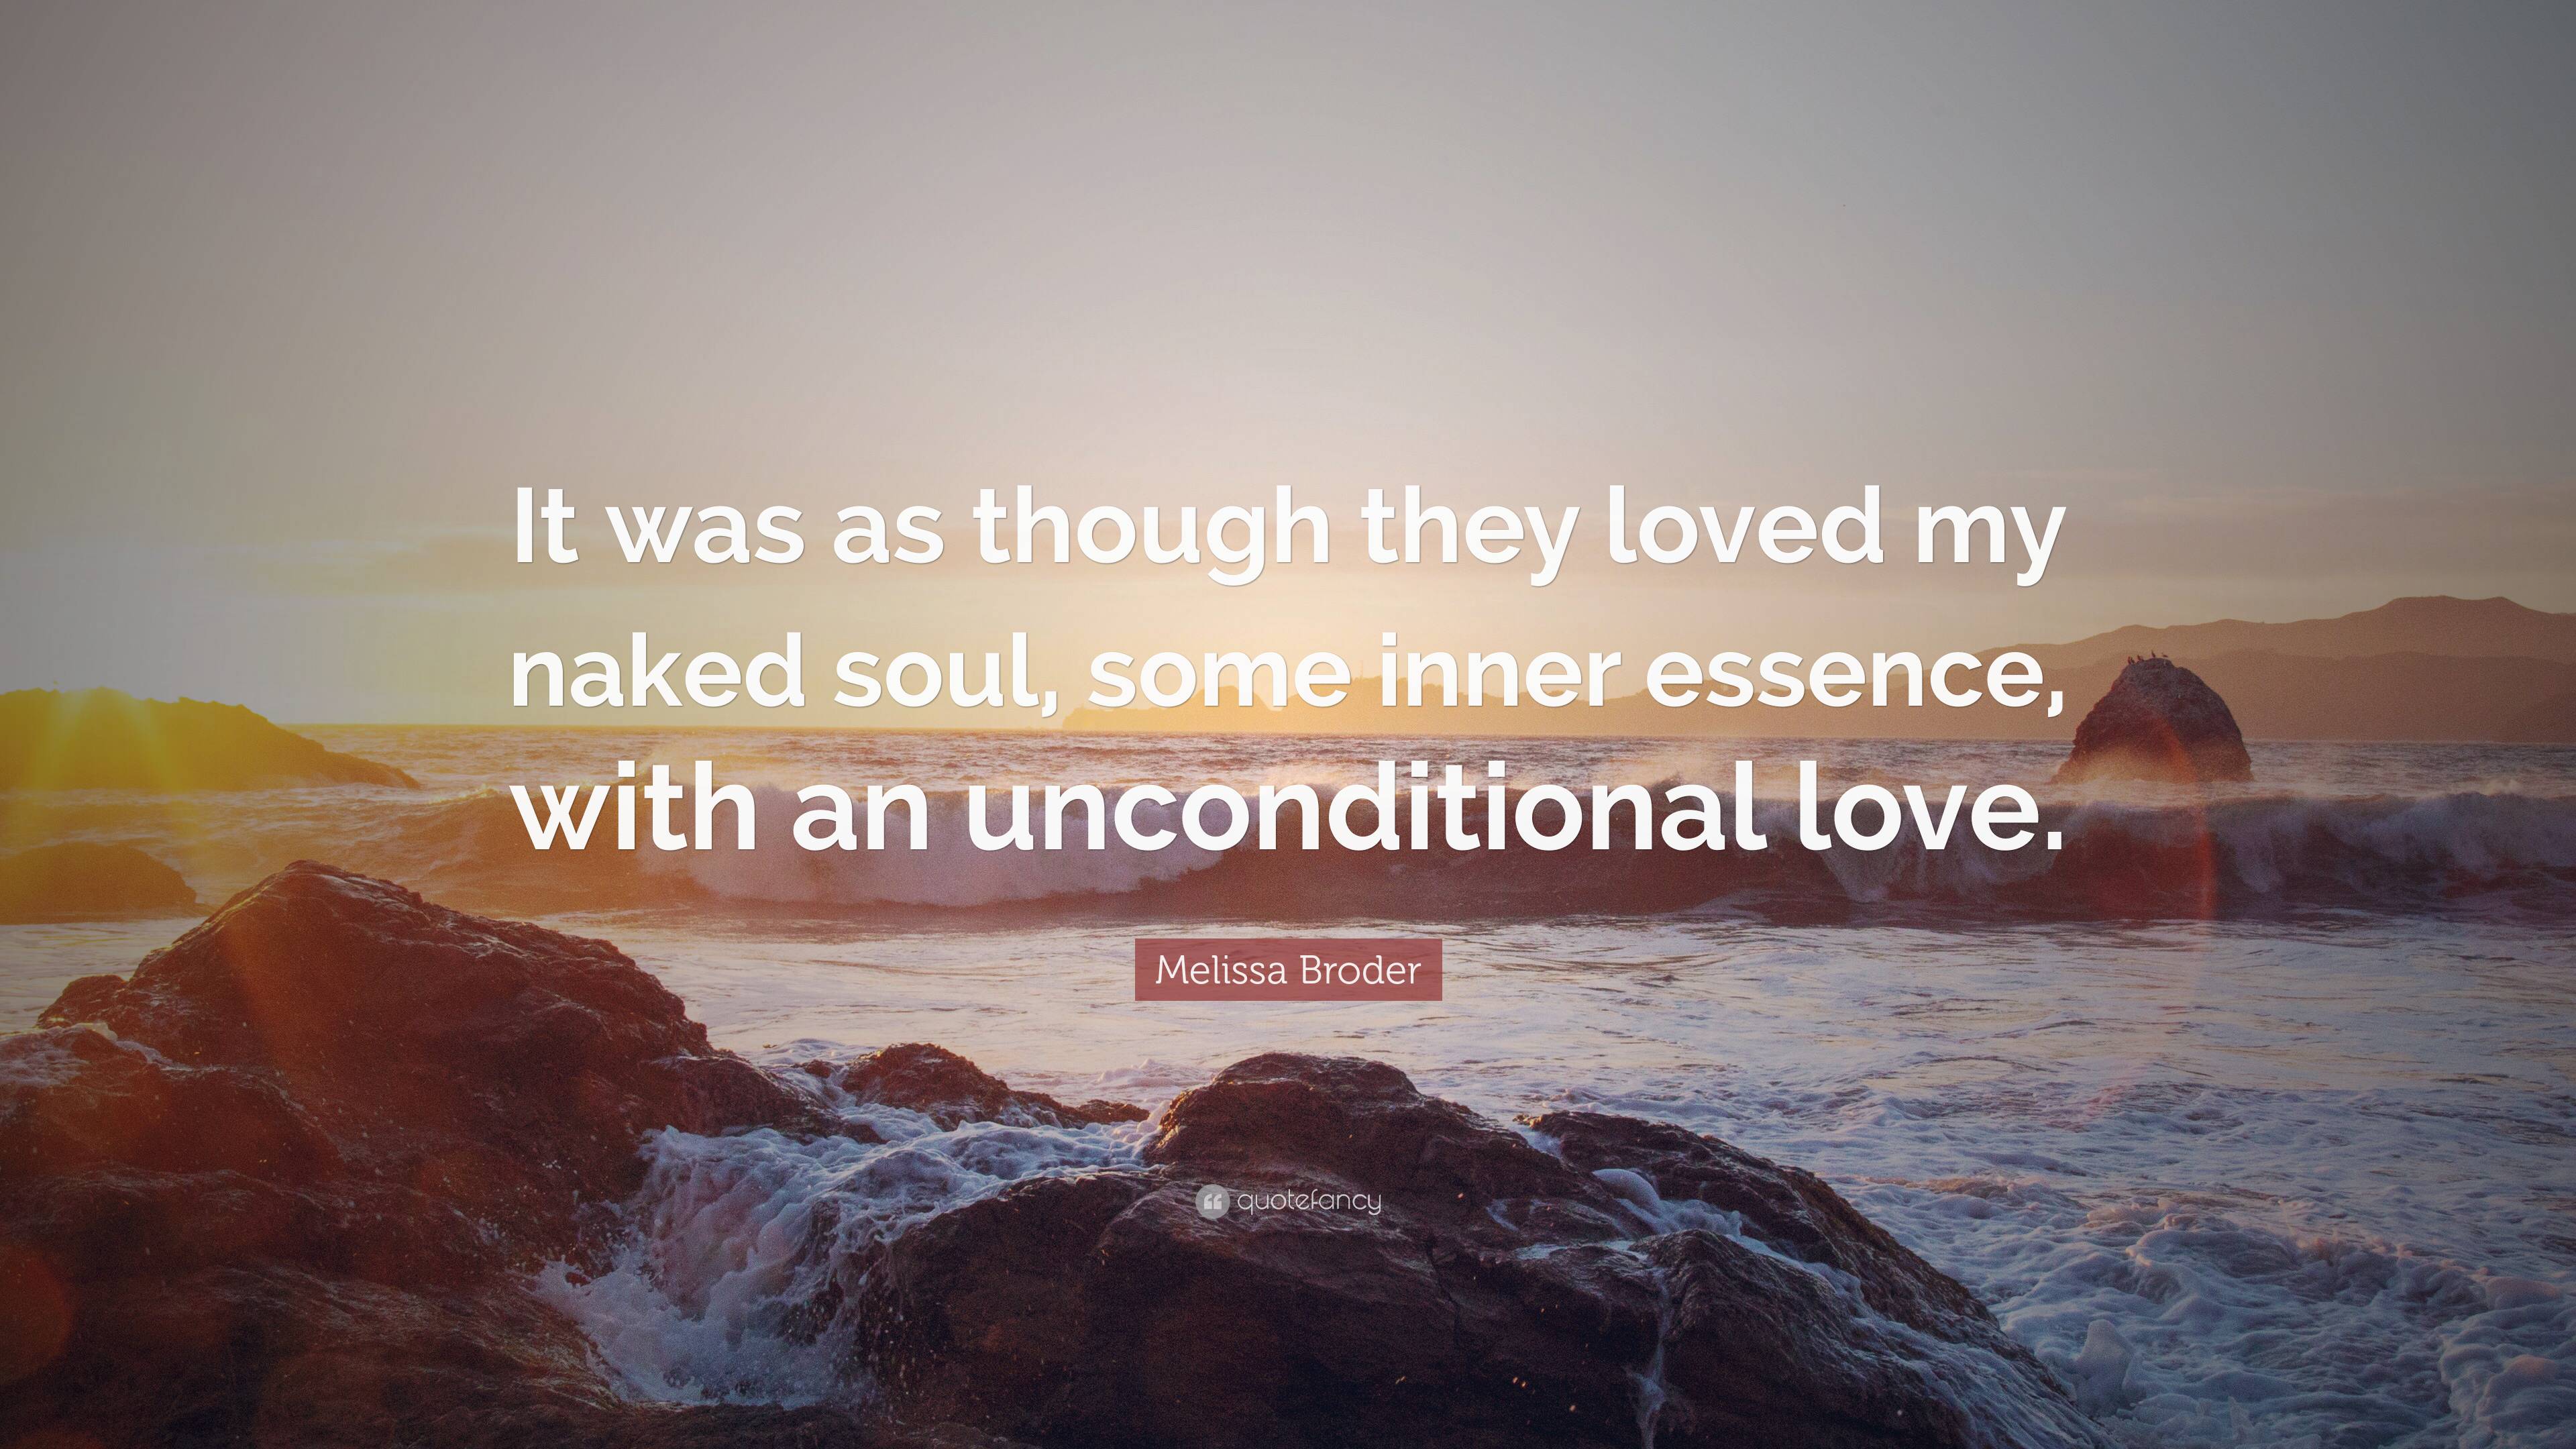 Melissa Broder Quote: “It was as though they loved my naked soul, some inner  essence, with